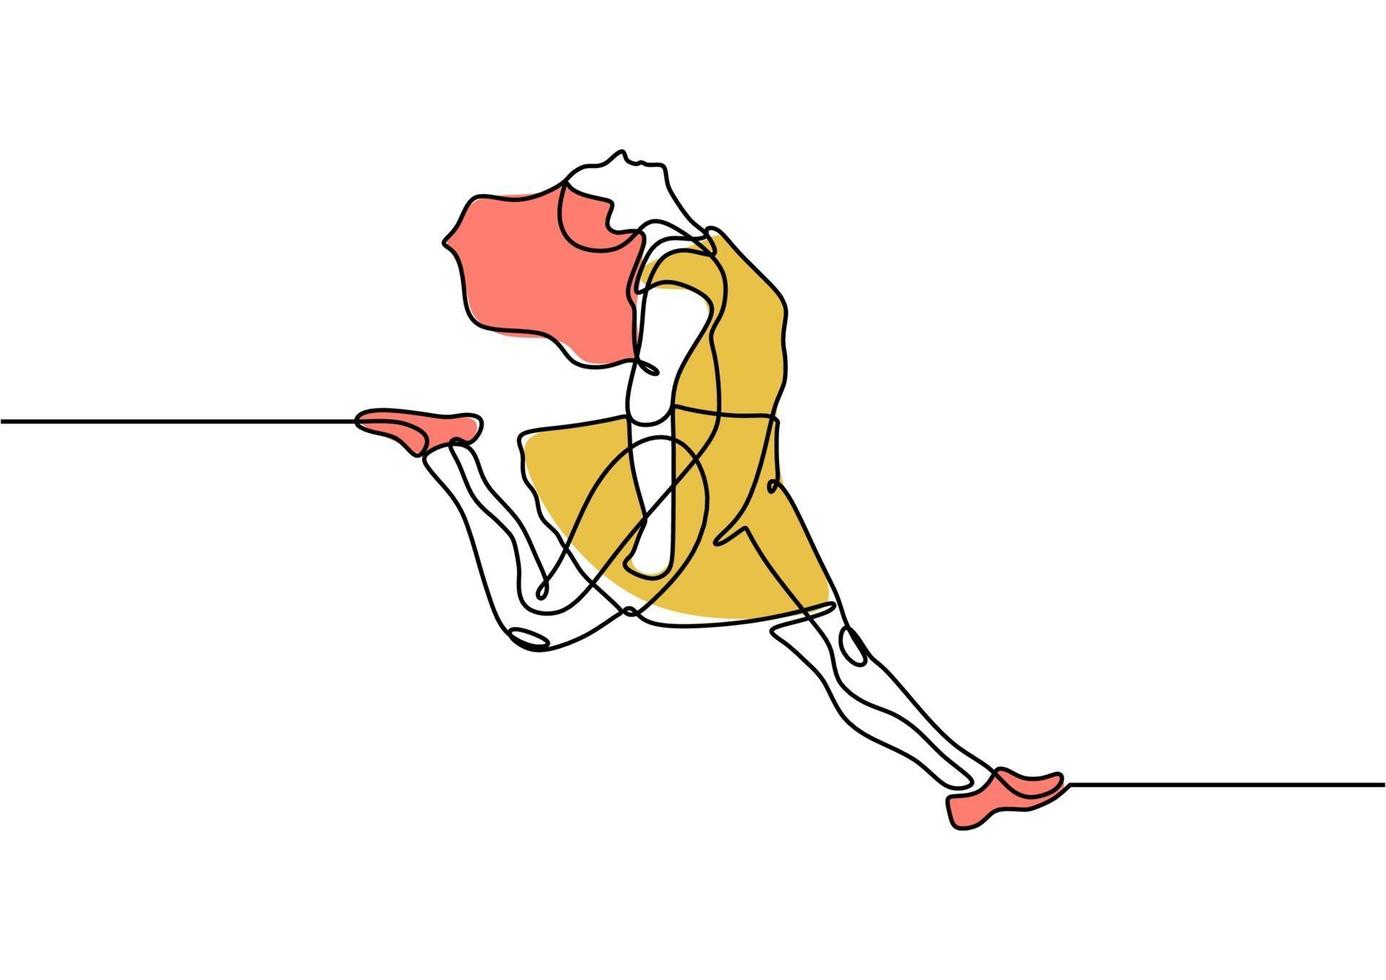 line drawing woman jump minimalism with colors vector